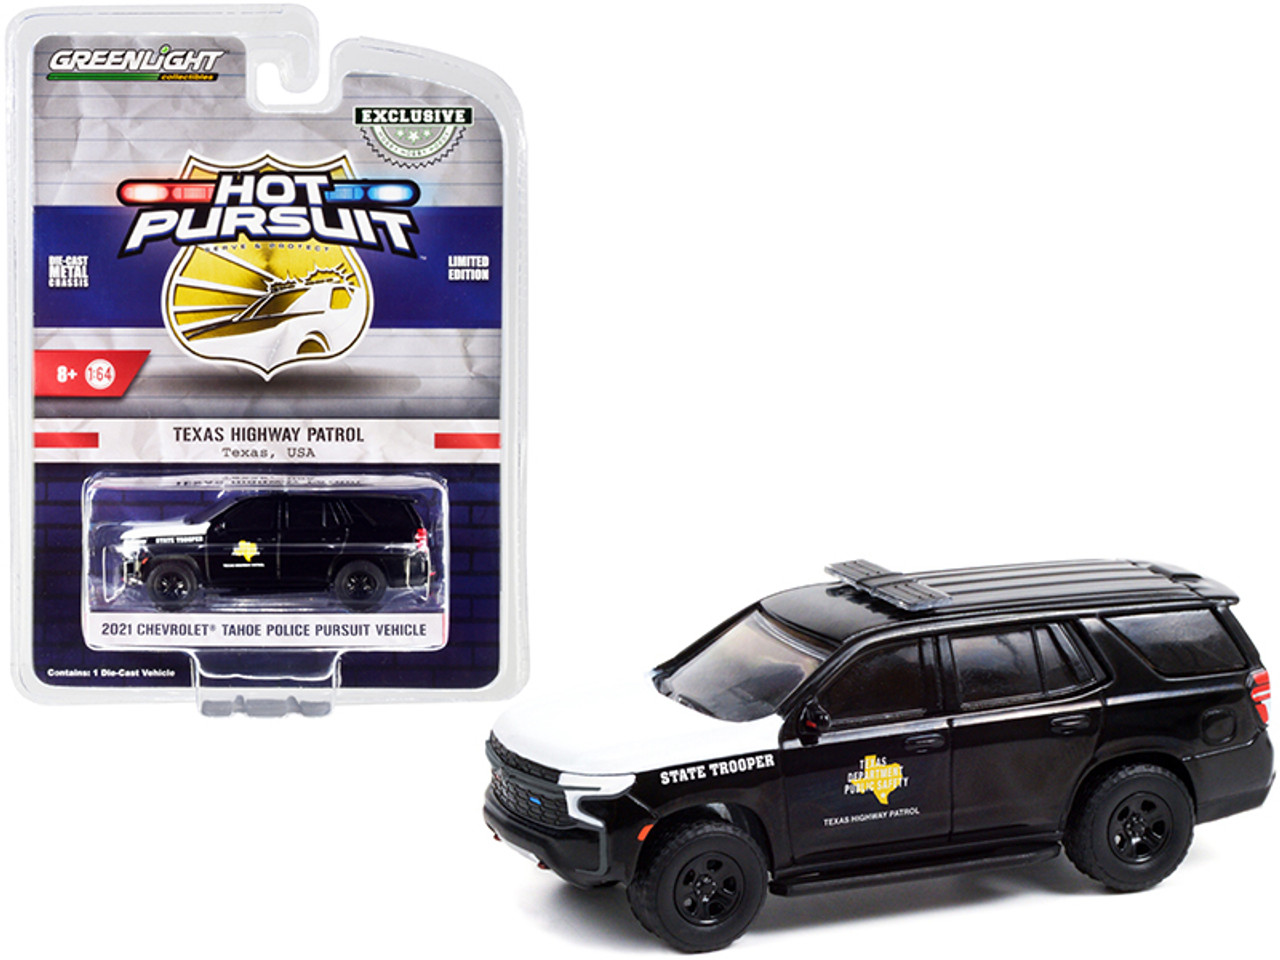 2021 Chevrolet Tahoe Police Pursuit Vehicle Black with White Hood "Texas Highway Patrol" "Hot Pursuit" Series 1/64 Diecast Model Car by Greenlight